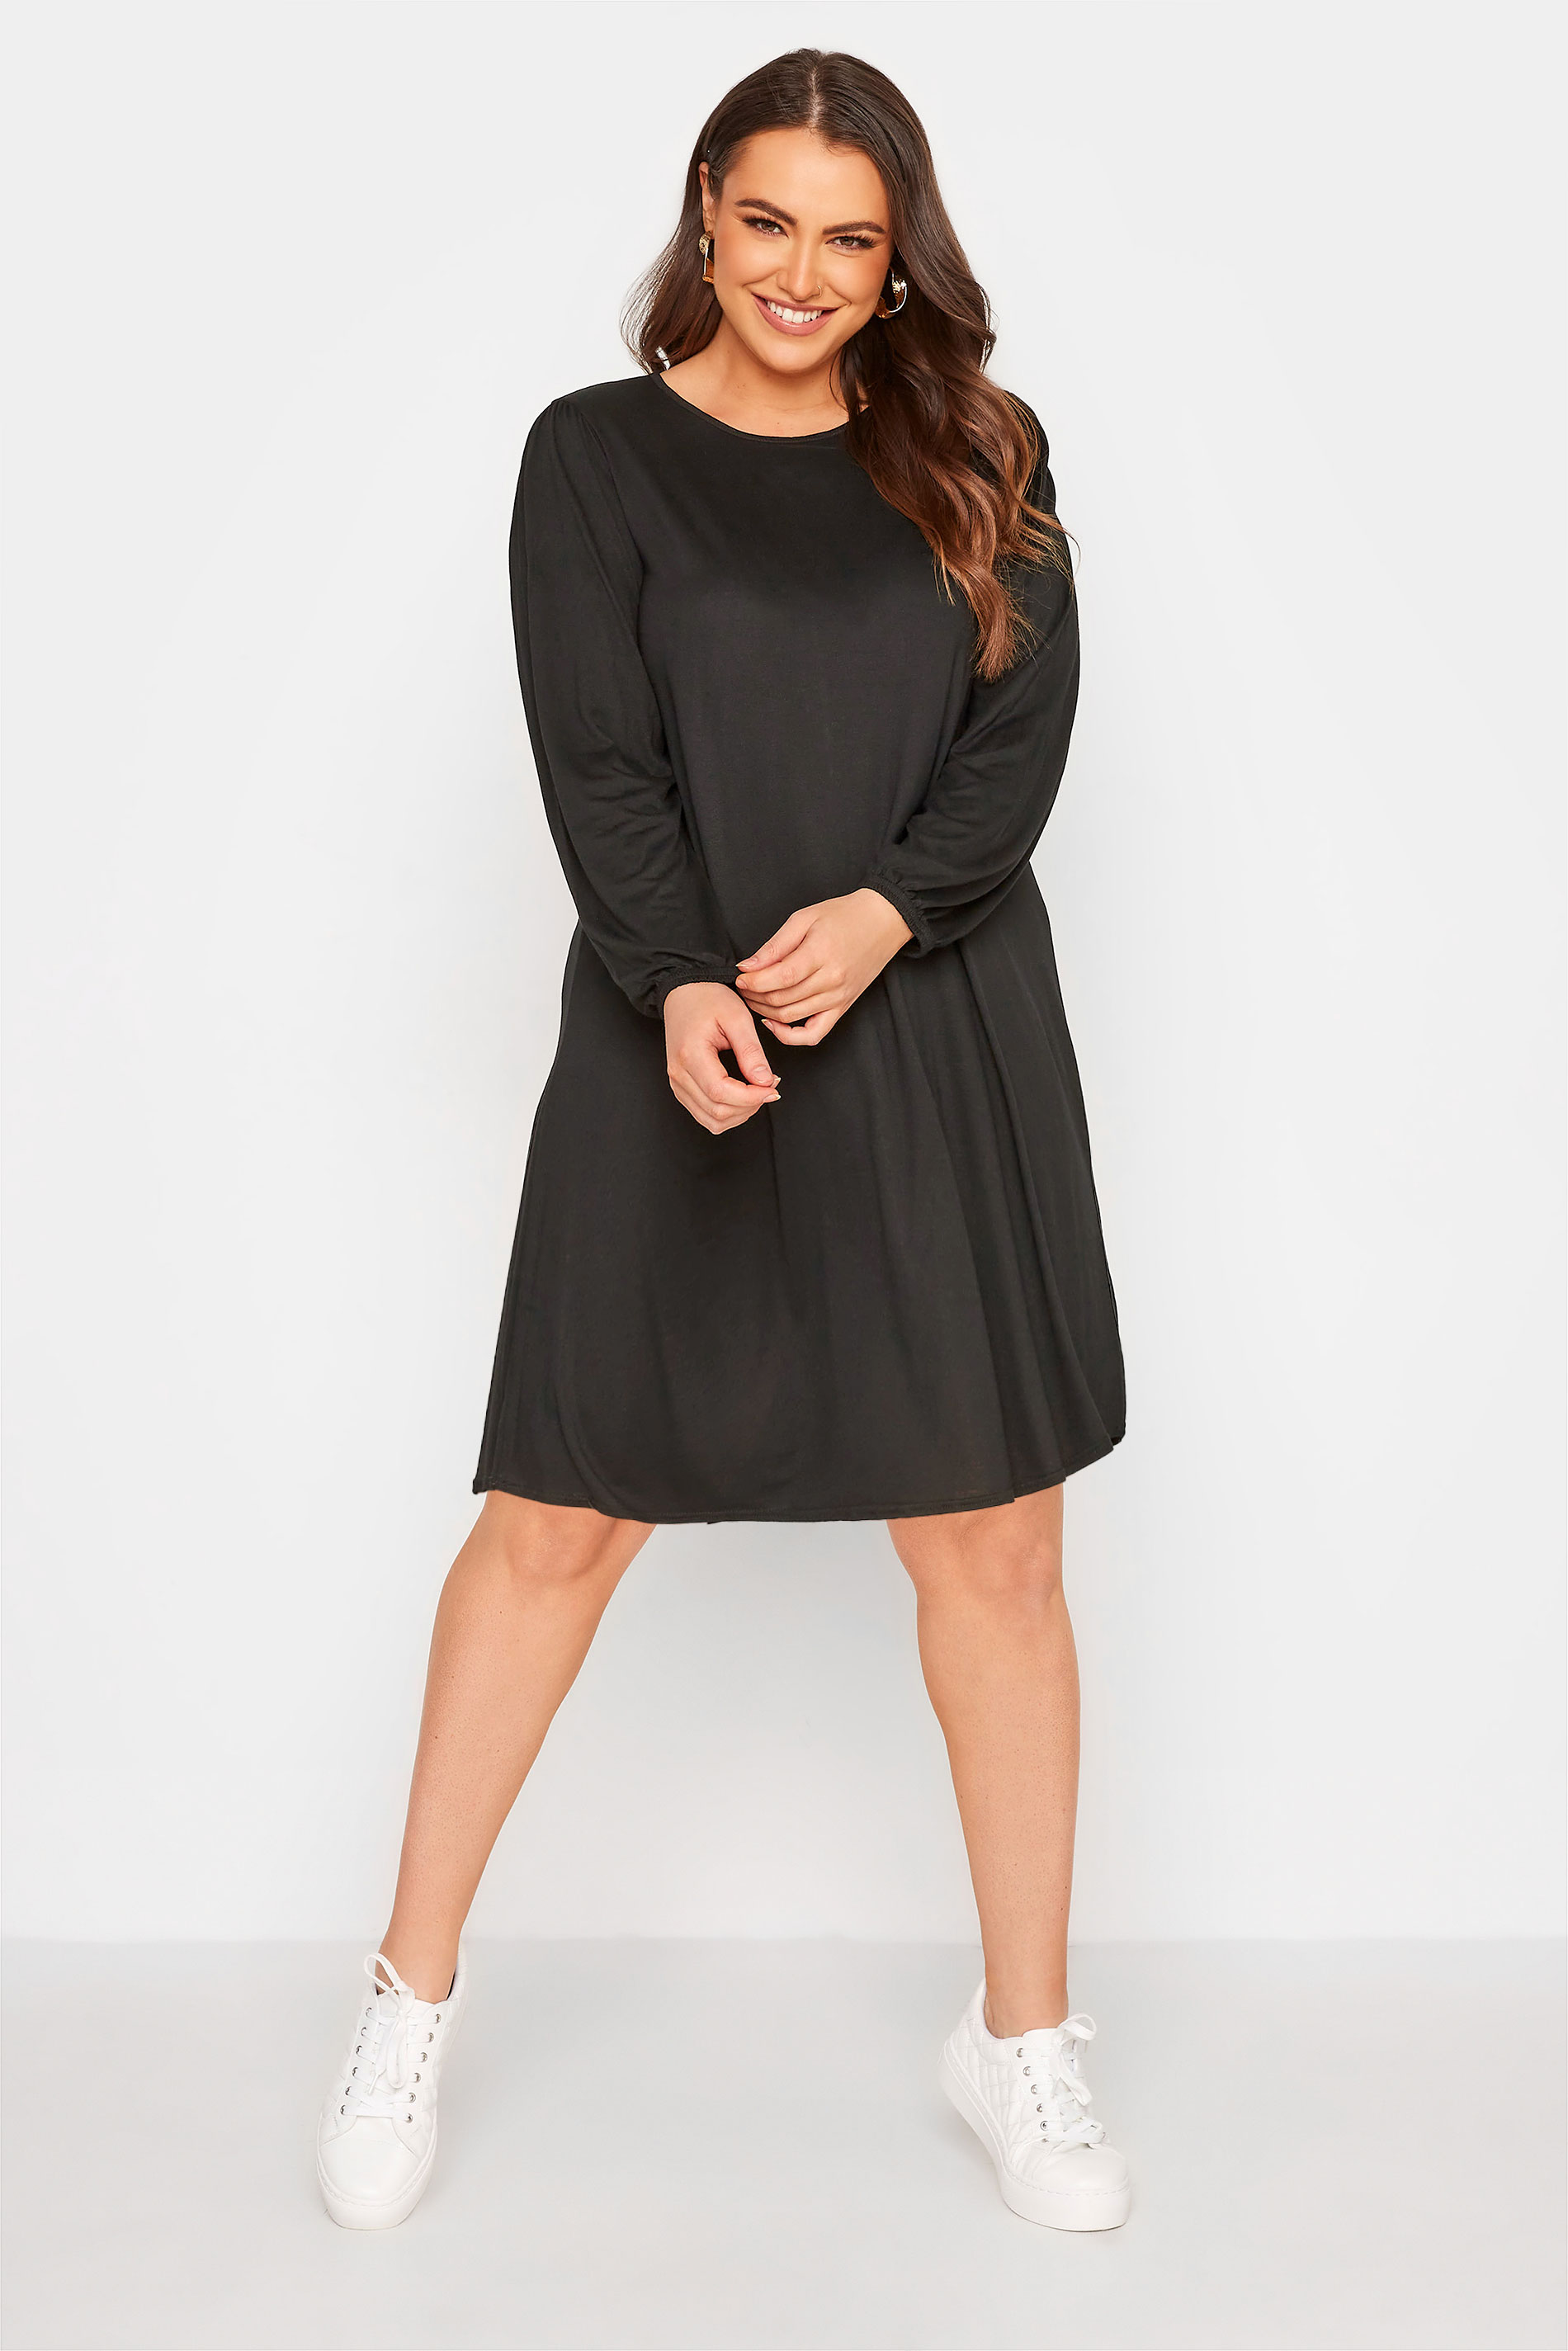 LIMITED COLLECTON Curve Black Swing Dress 1